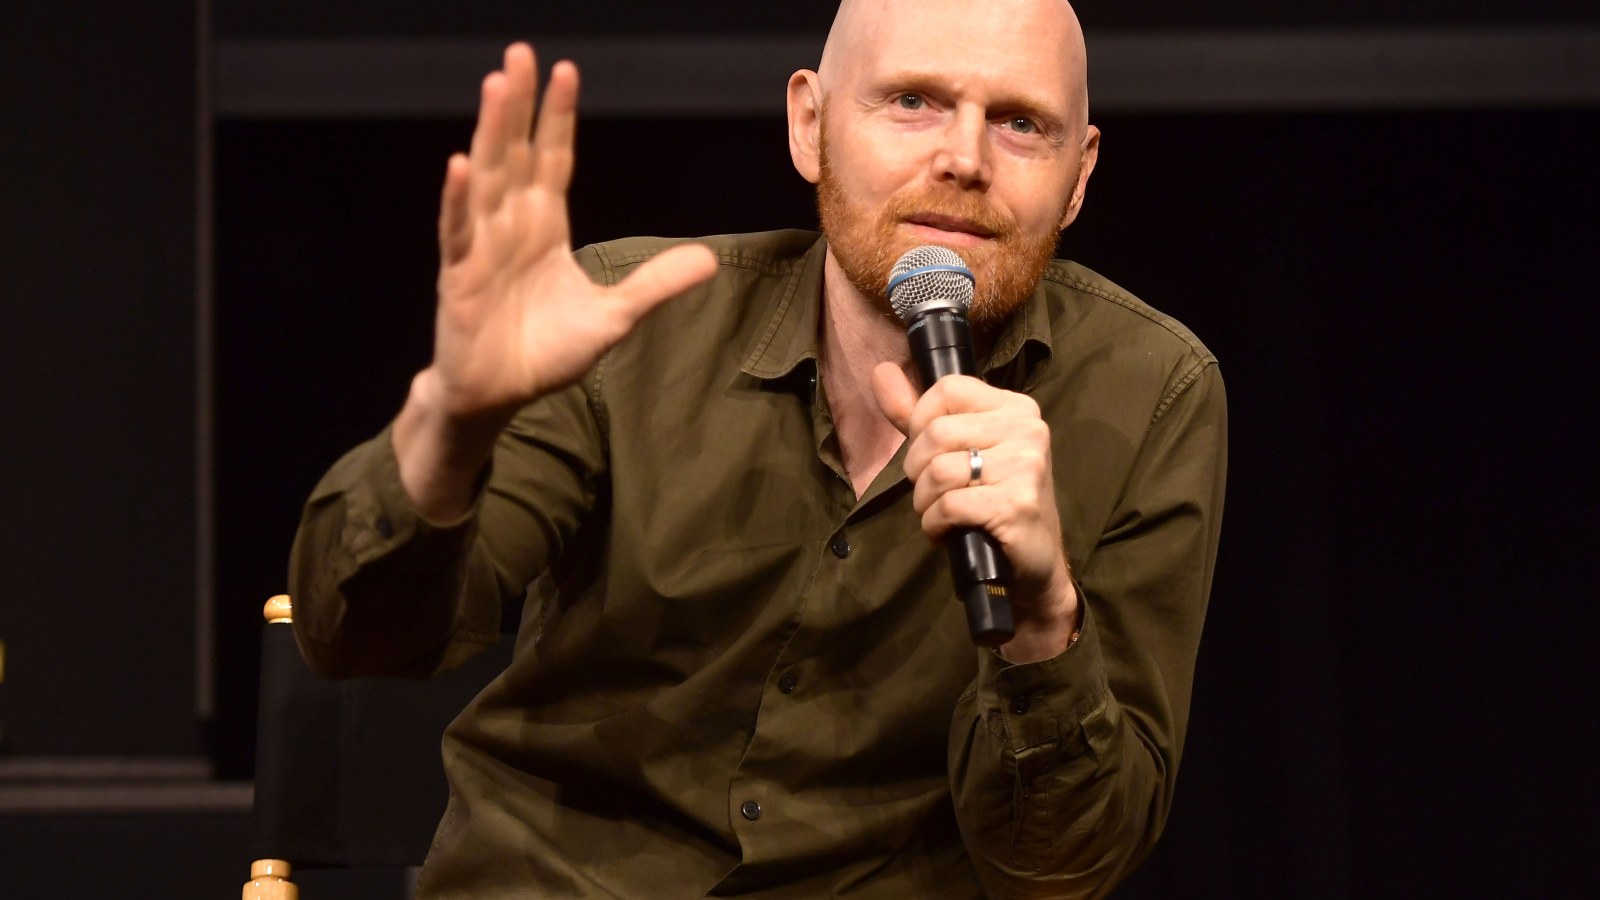 Did Bill Burr Really Just Say That?' Mixed Reactions Follow Controversial  'SNL' Monologue